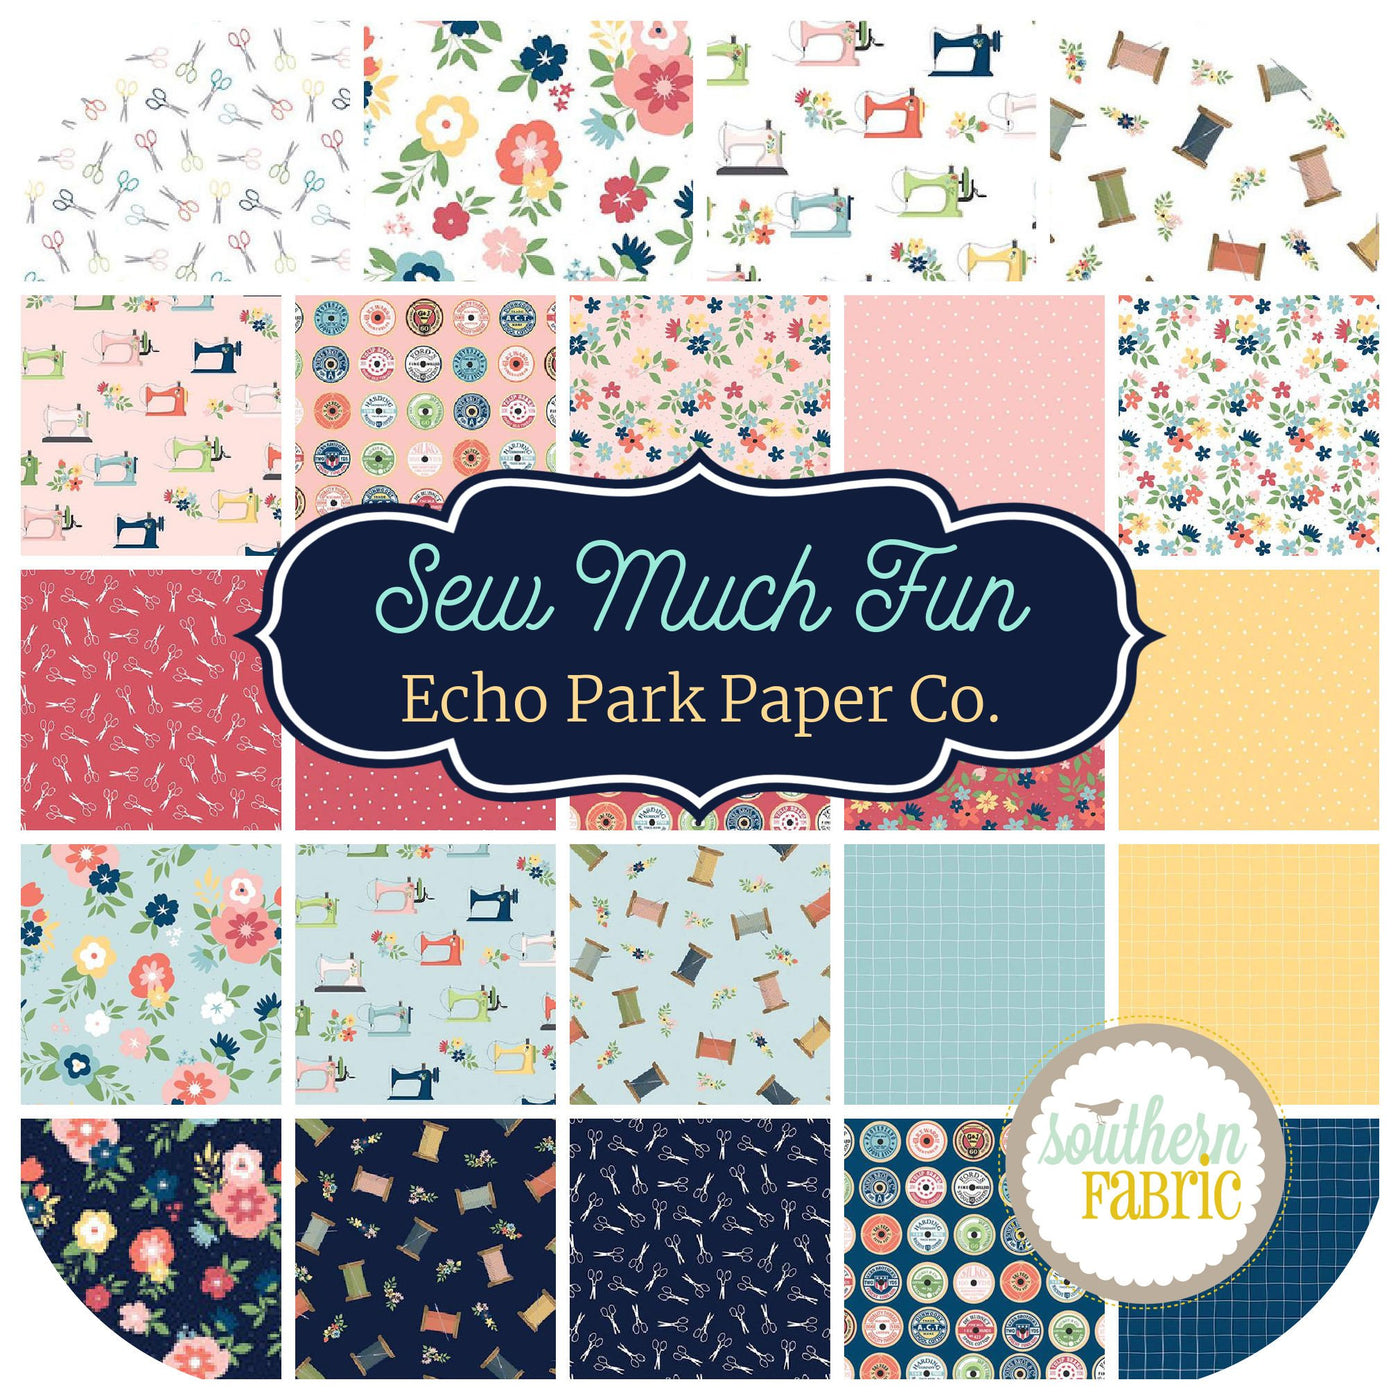 Sew Much Fun Layer Cake (42 pcs) by Echo Park Paper Company for Riley Blake (10-12450-42)